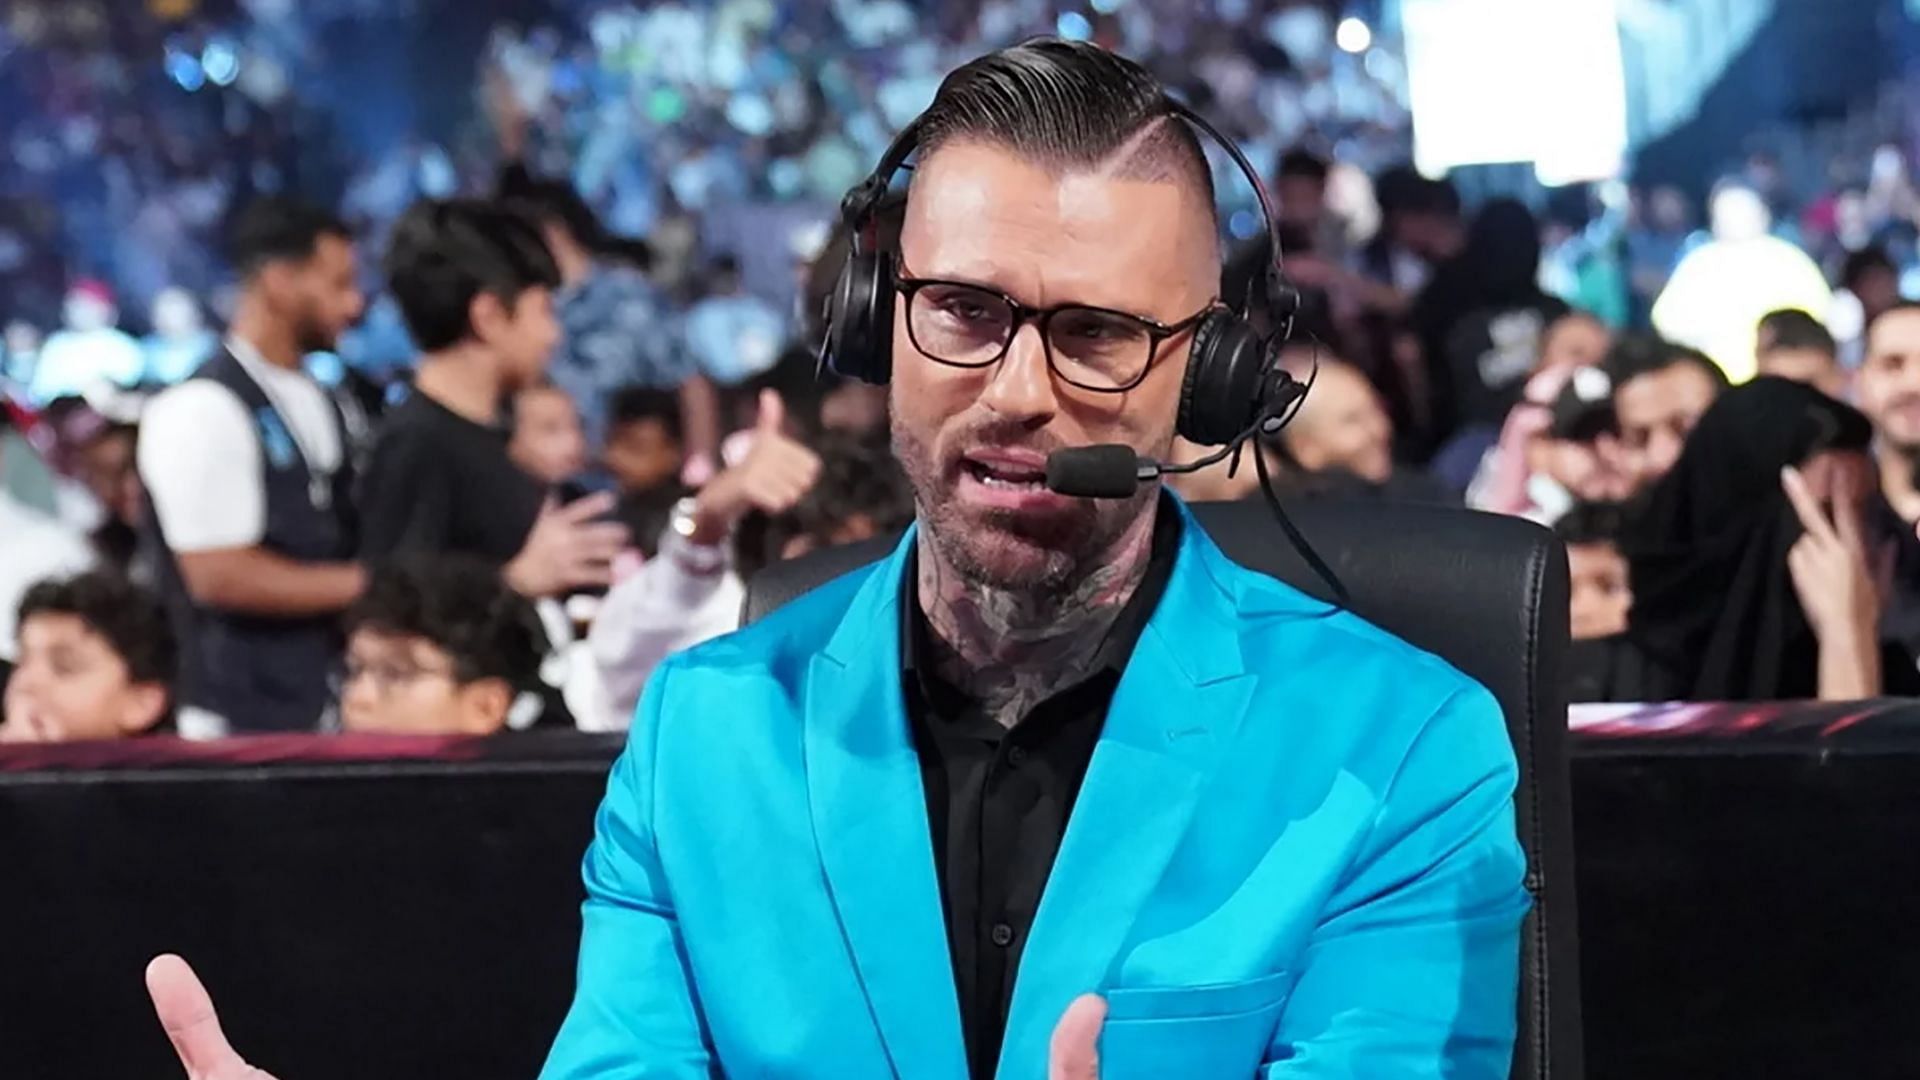 Corey Graves provides his analysis on WWE SmackDown